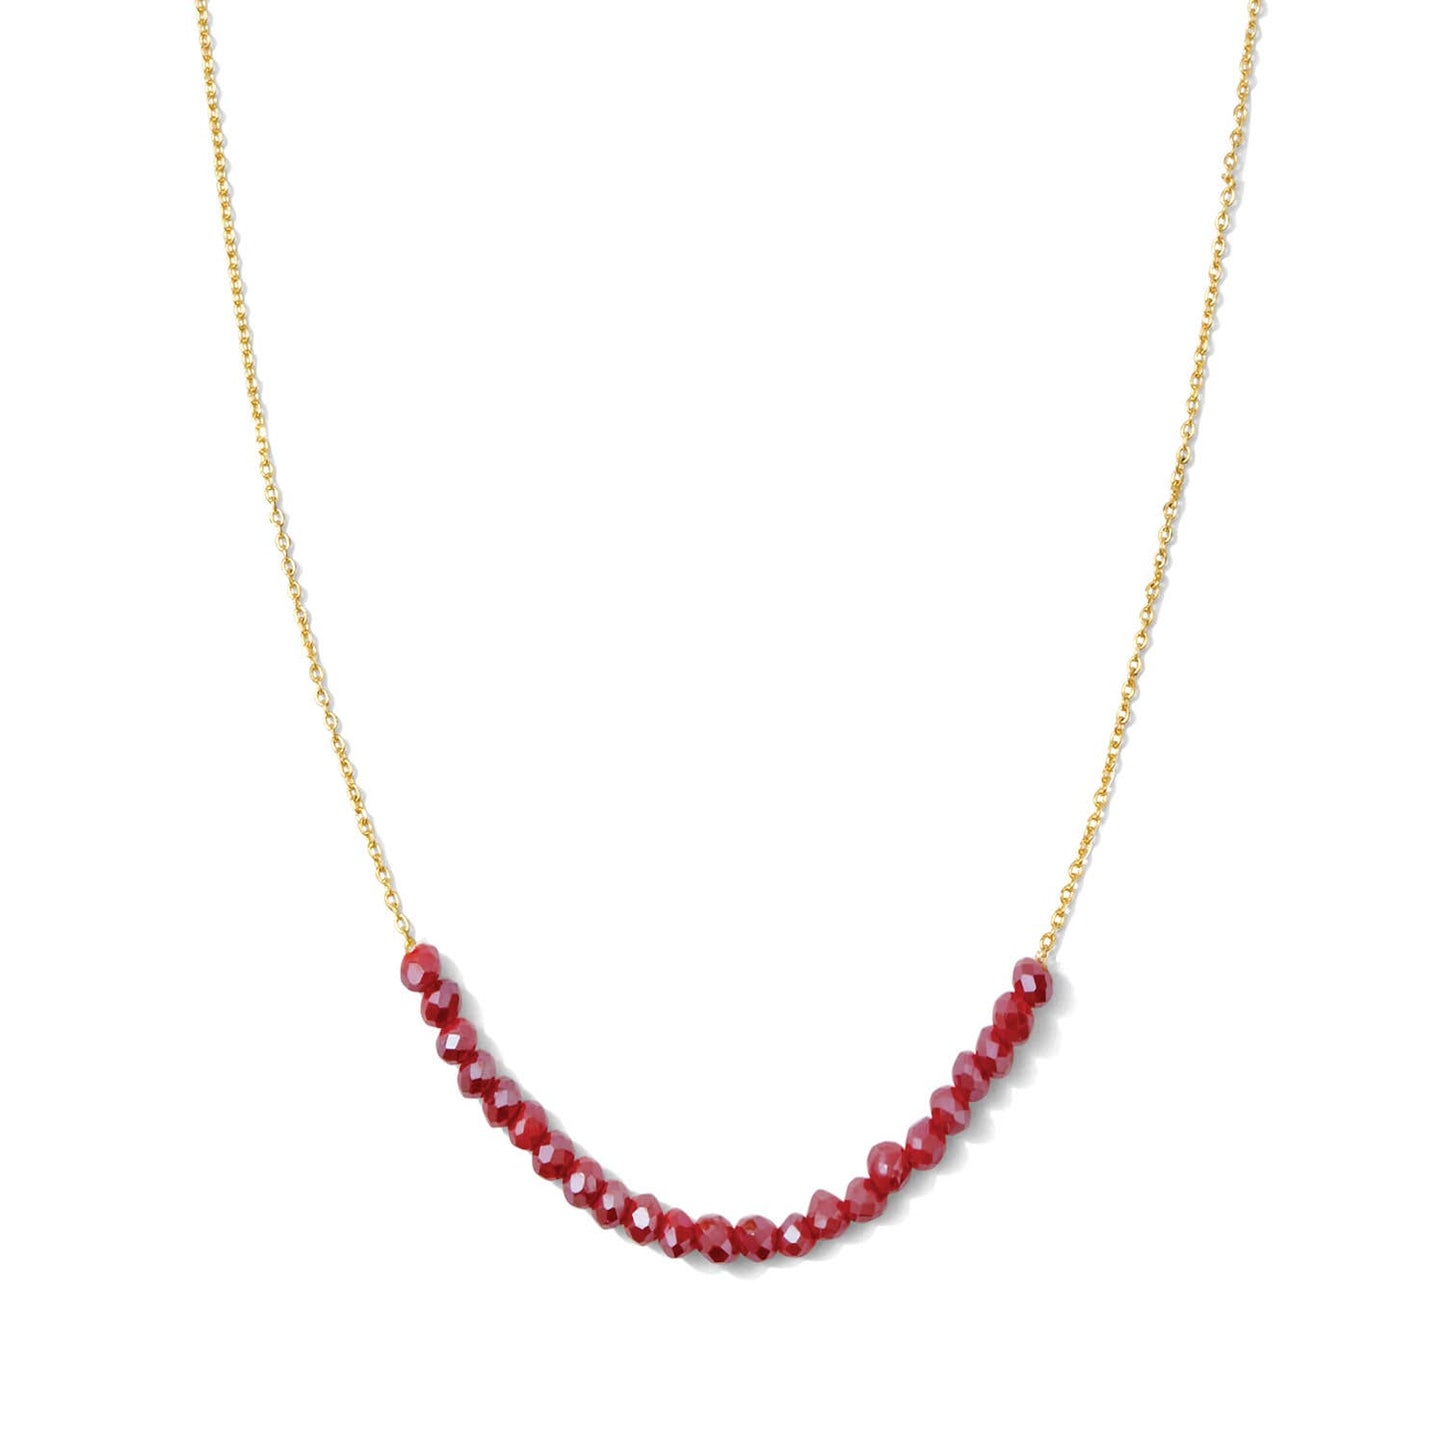 Splendid Iris - Delicate Crystal Accented Necklace: Cranberry